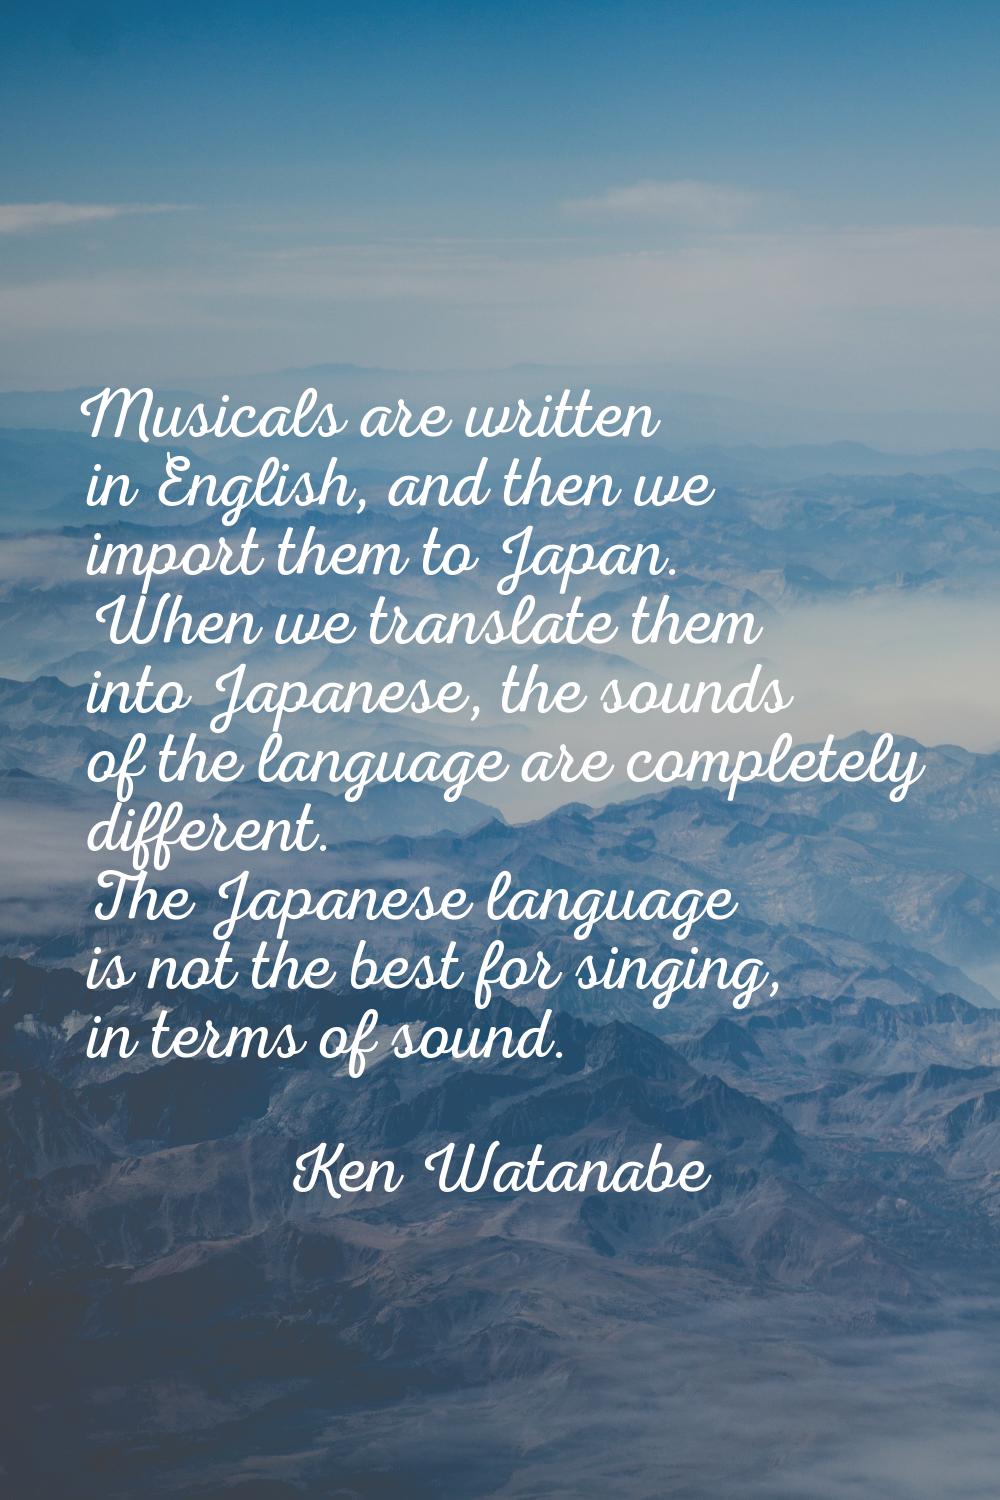 Musicals are written in English, and then we import them to Japan. When we translate them into Japa